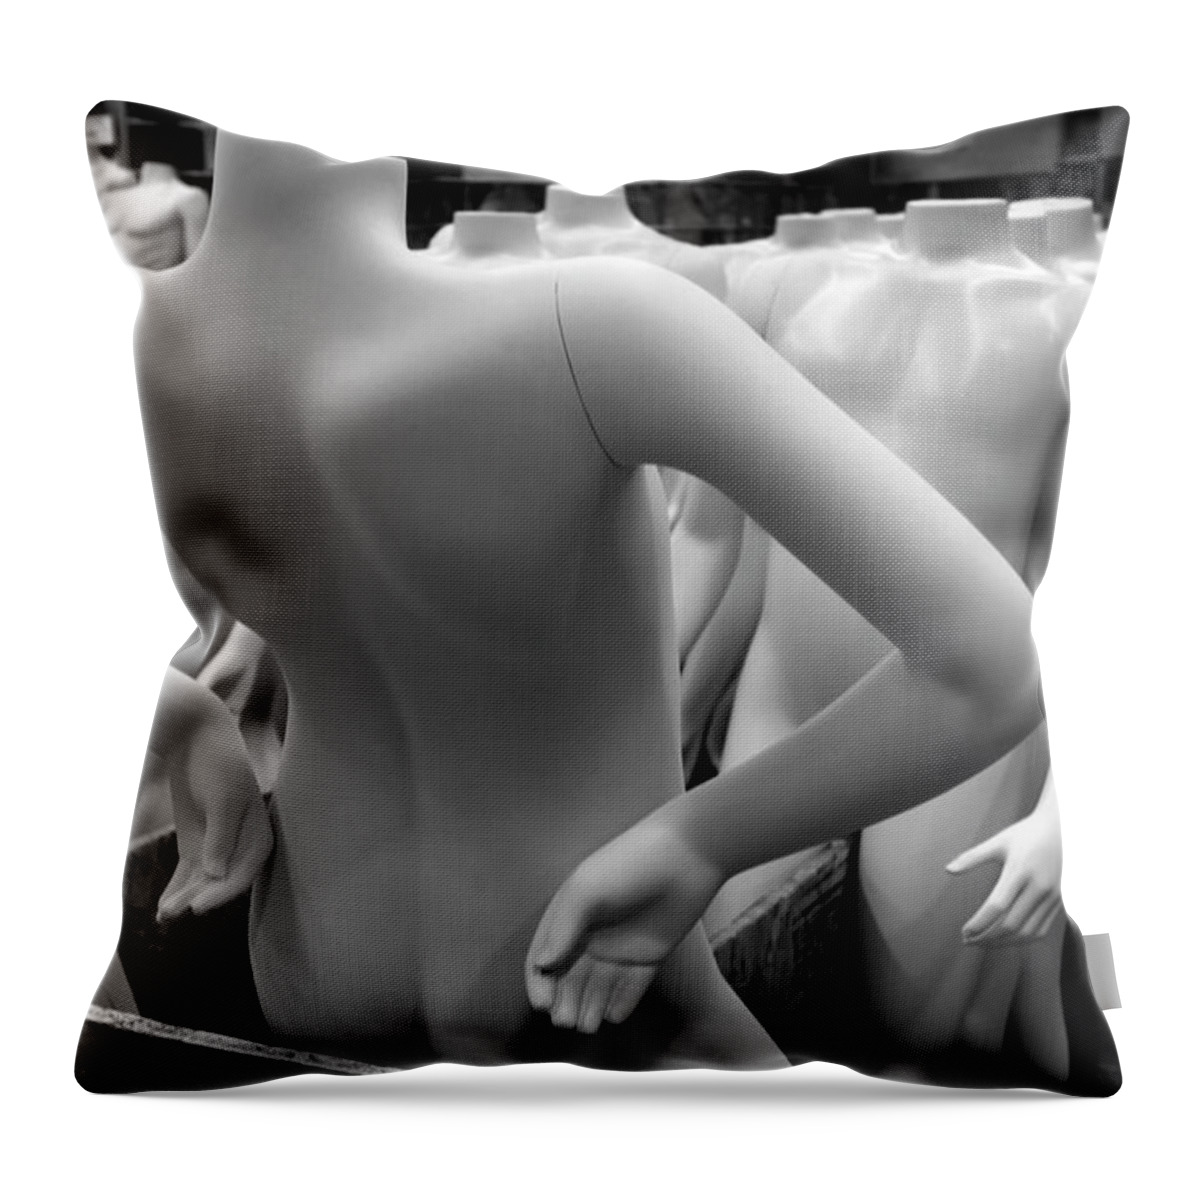 Female Mannequins Throw Pillow featuring the photograph Female Mannequins by Rick Wilking